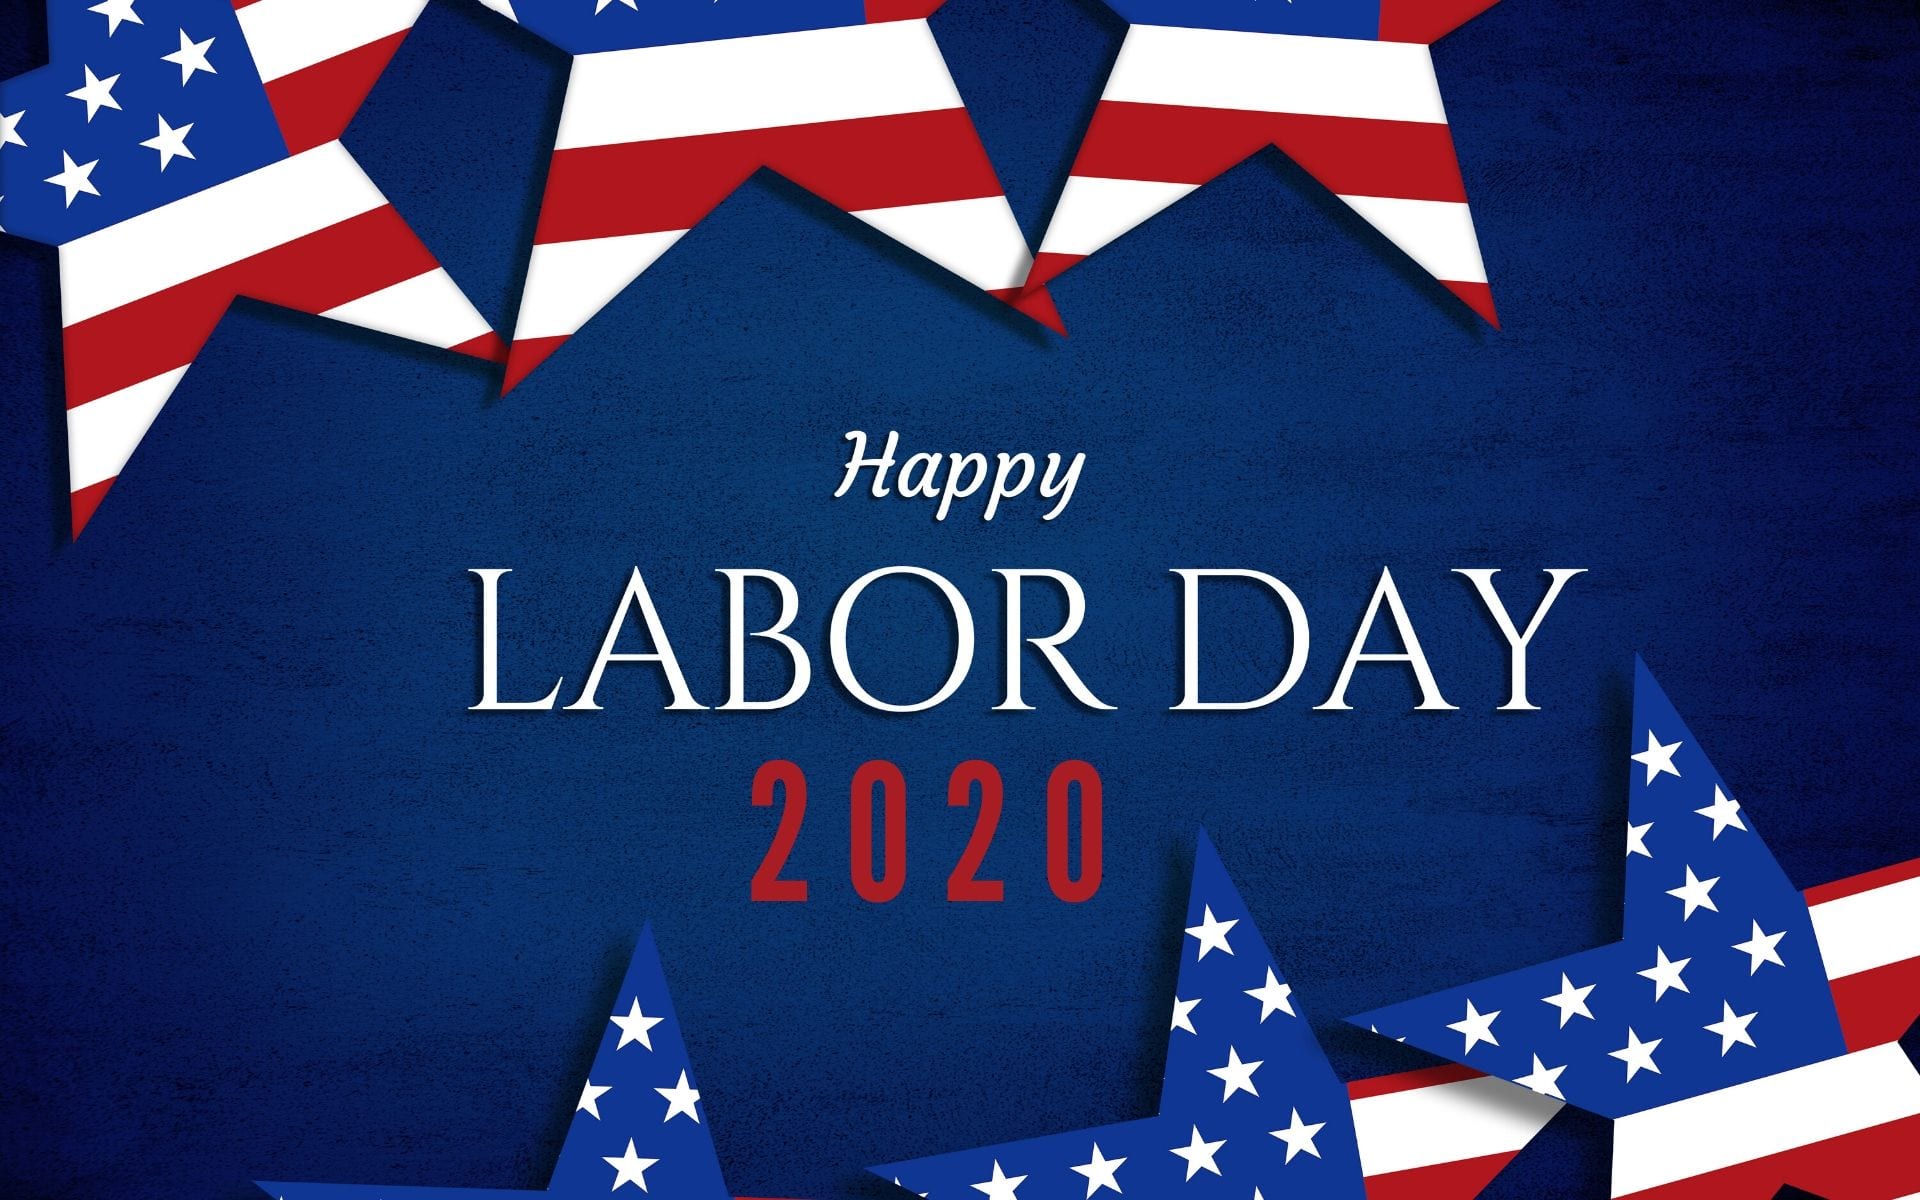 Happy Labor Day Wishes Image & HD Wallpaper